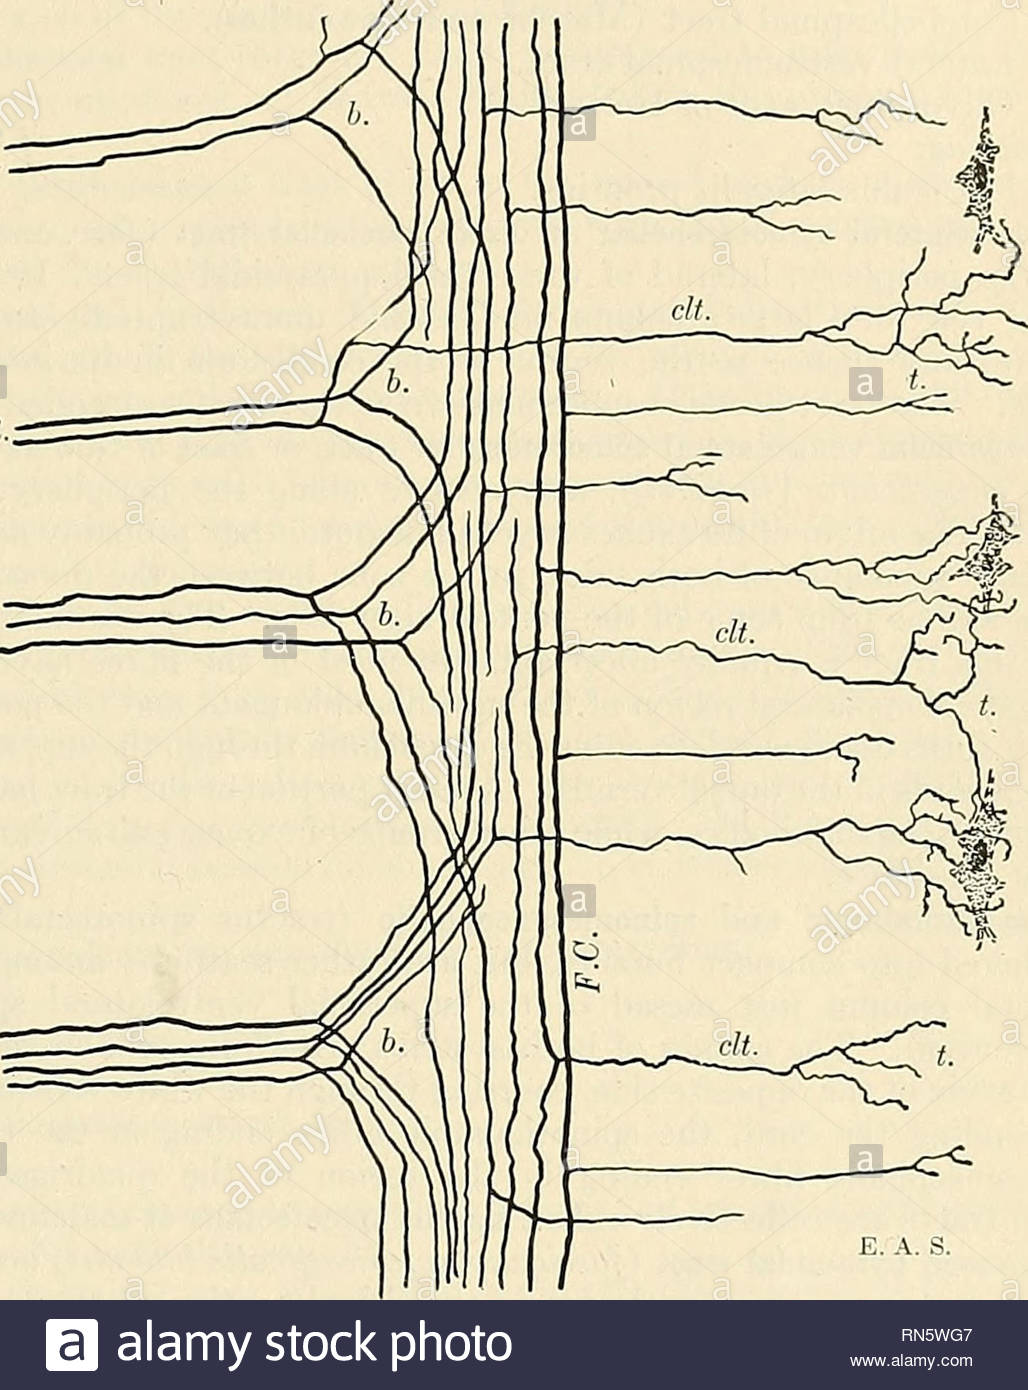 anatomy descriptive and applied anatomy the spinal cord 837 well as toward clarkes column while a third group of fibres forms the so called marginal tract situated close to or among the entering fibres of the dorsal roots but frec uently described as lying in the lateral column the tract is demonstrable in all levels and is made up of successive increments of relatively short axones traversing not more than three or four segments to end in relation with the cells in the gdafiiiosa rolandi ground btindle of the dorsal columna zone of fibres contiguous with the dorsal face of the RN5WG7